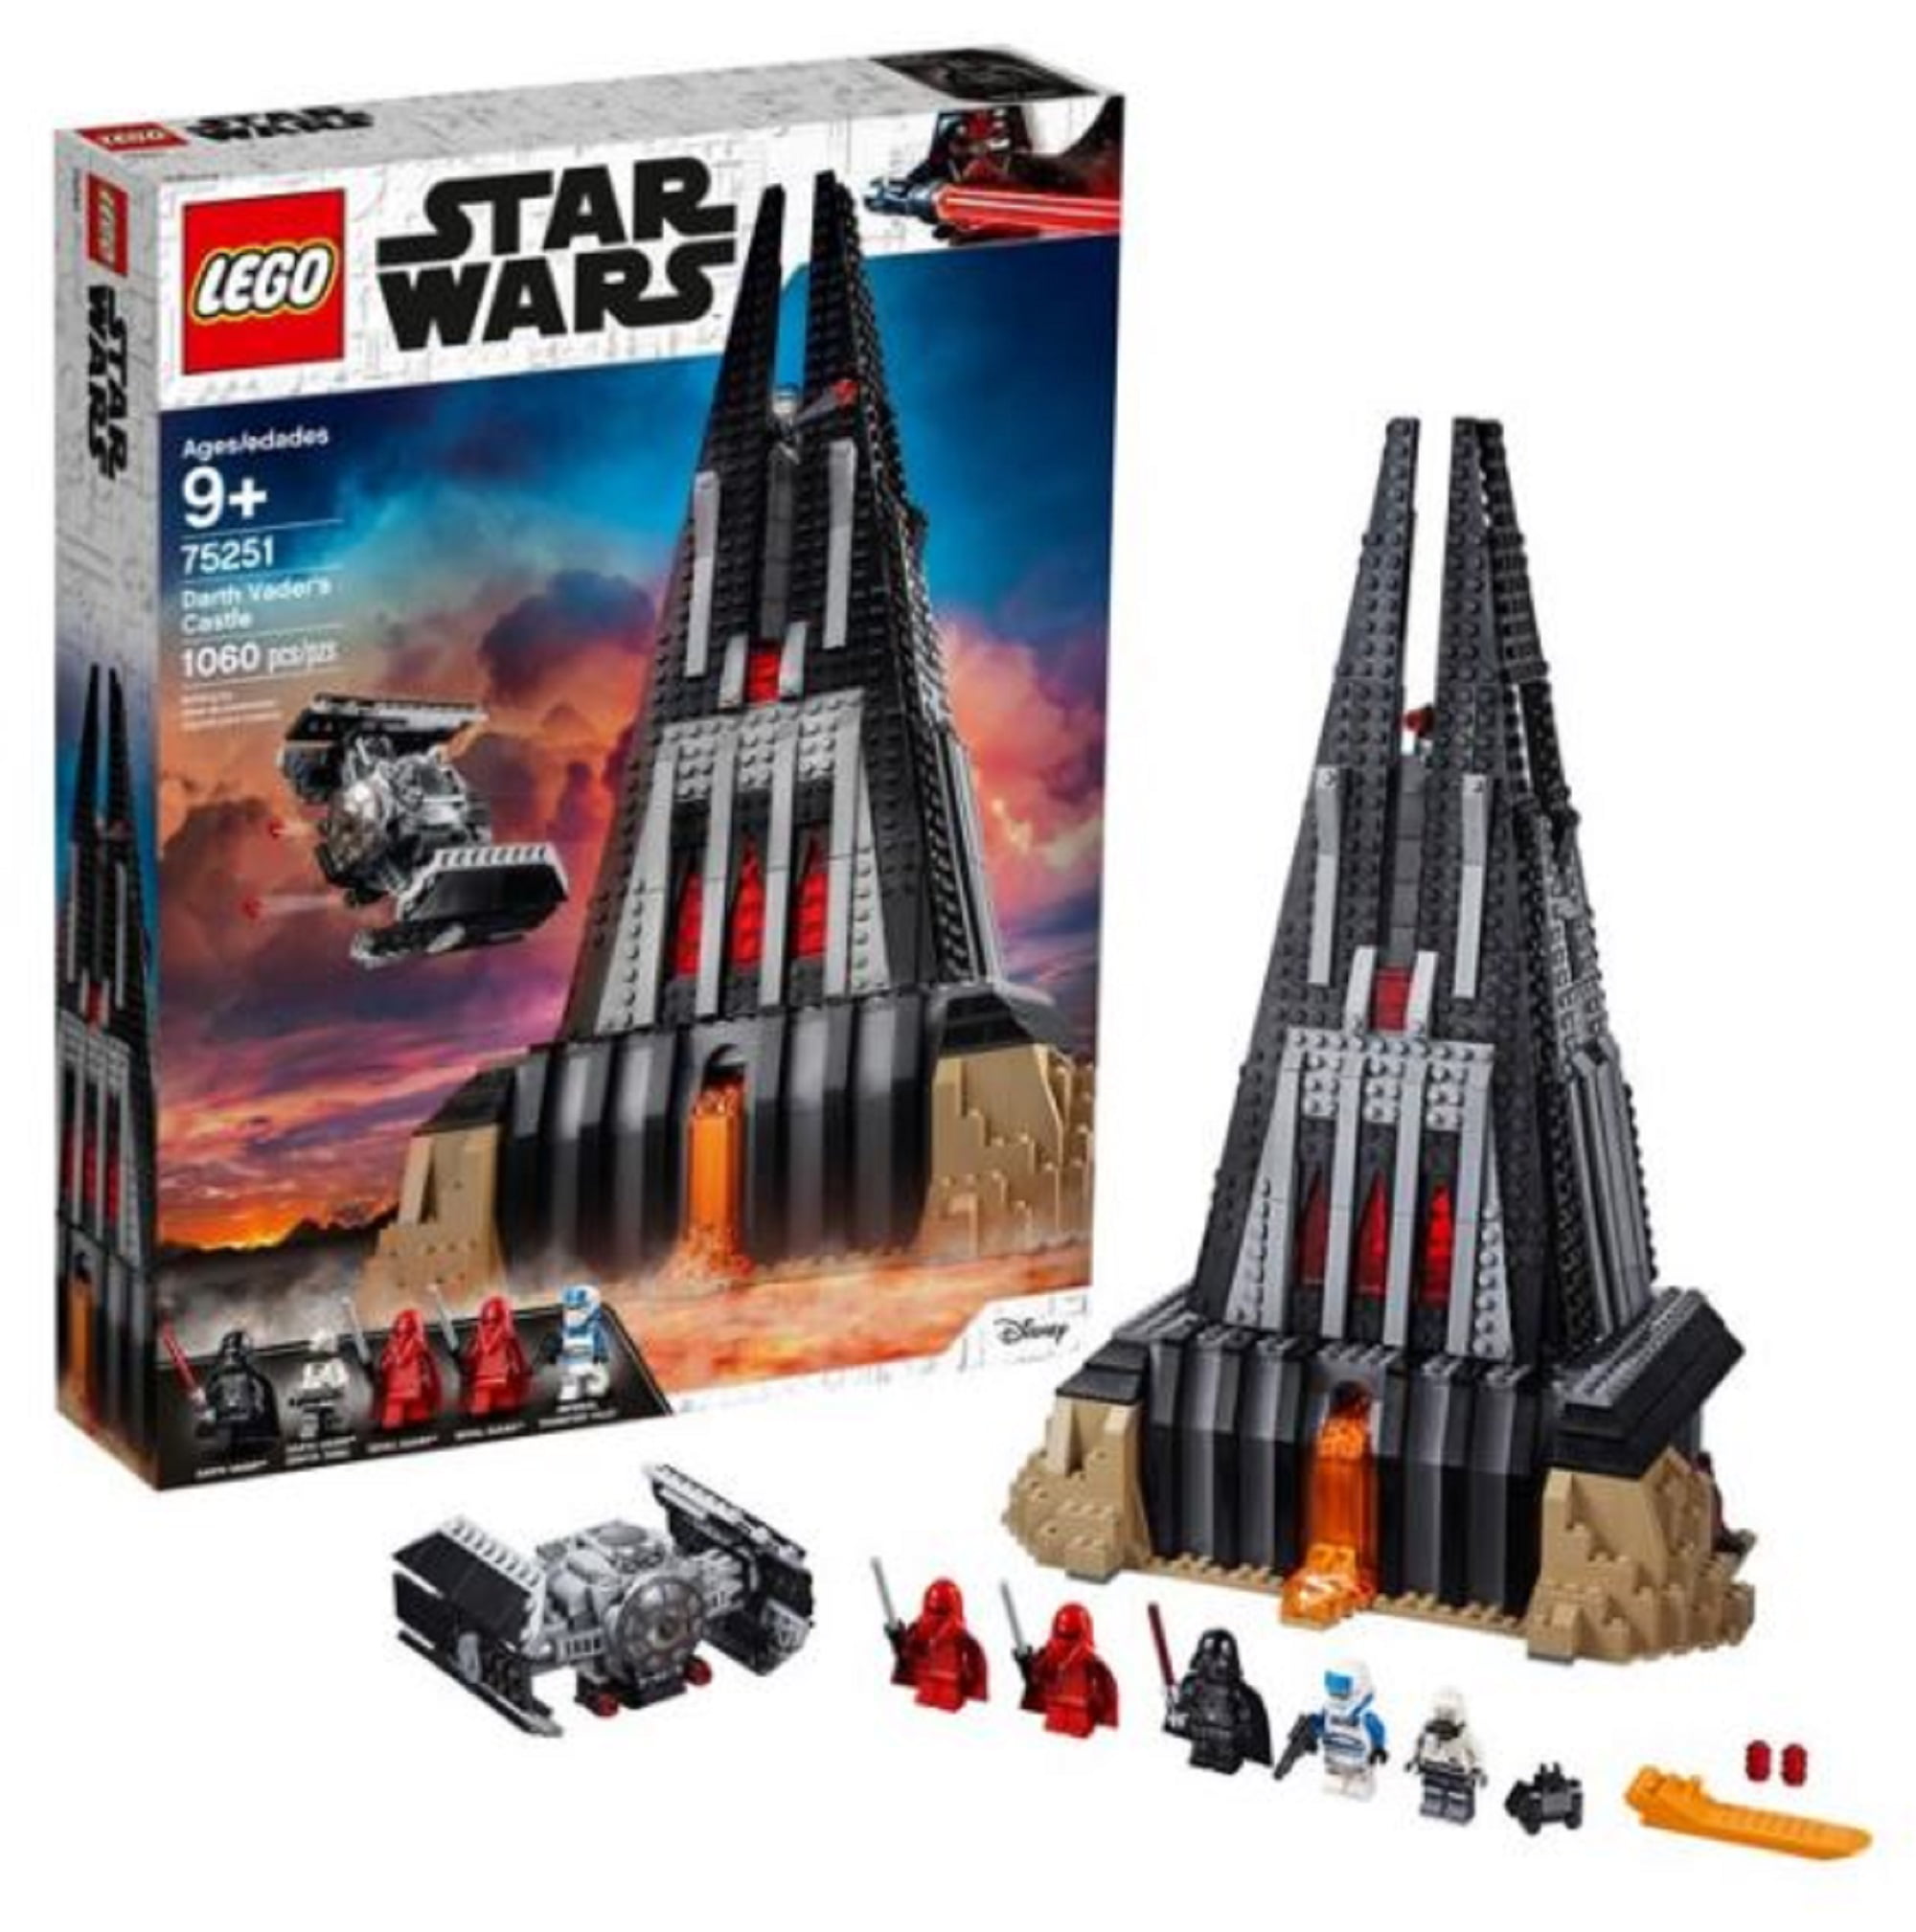 Lego Star Wars Darth Vaders Castle For Ages 9 Plus 1060 Pieces Model